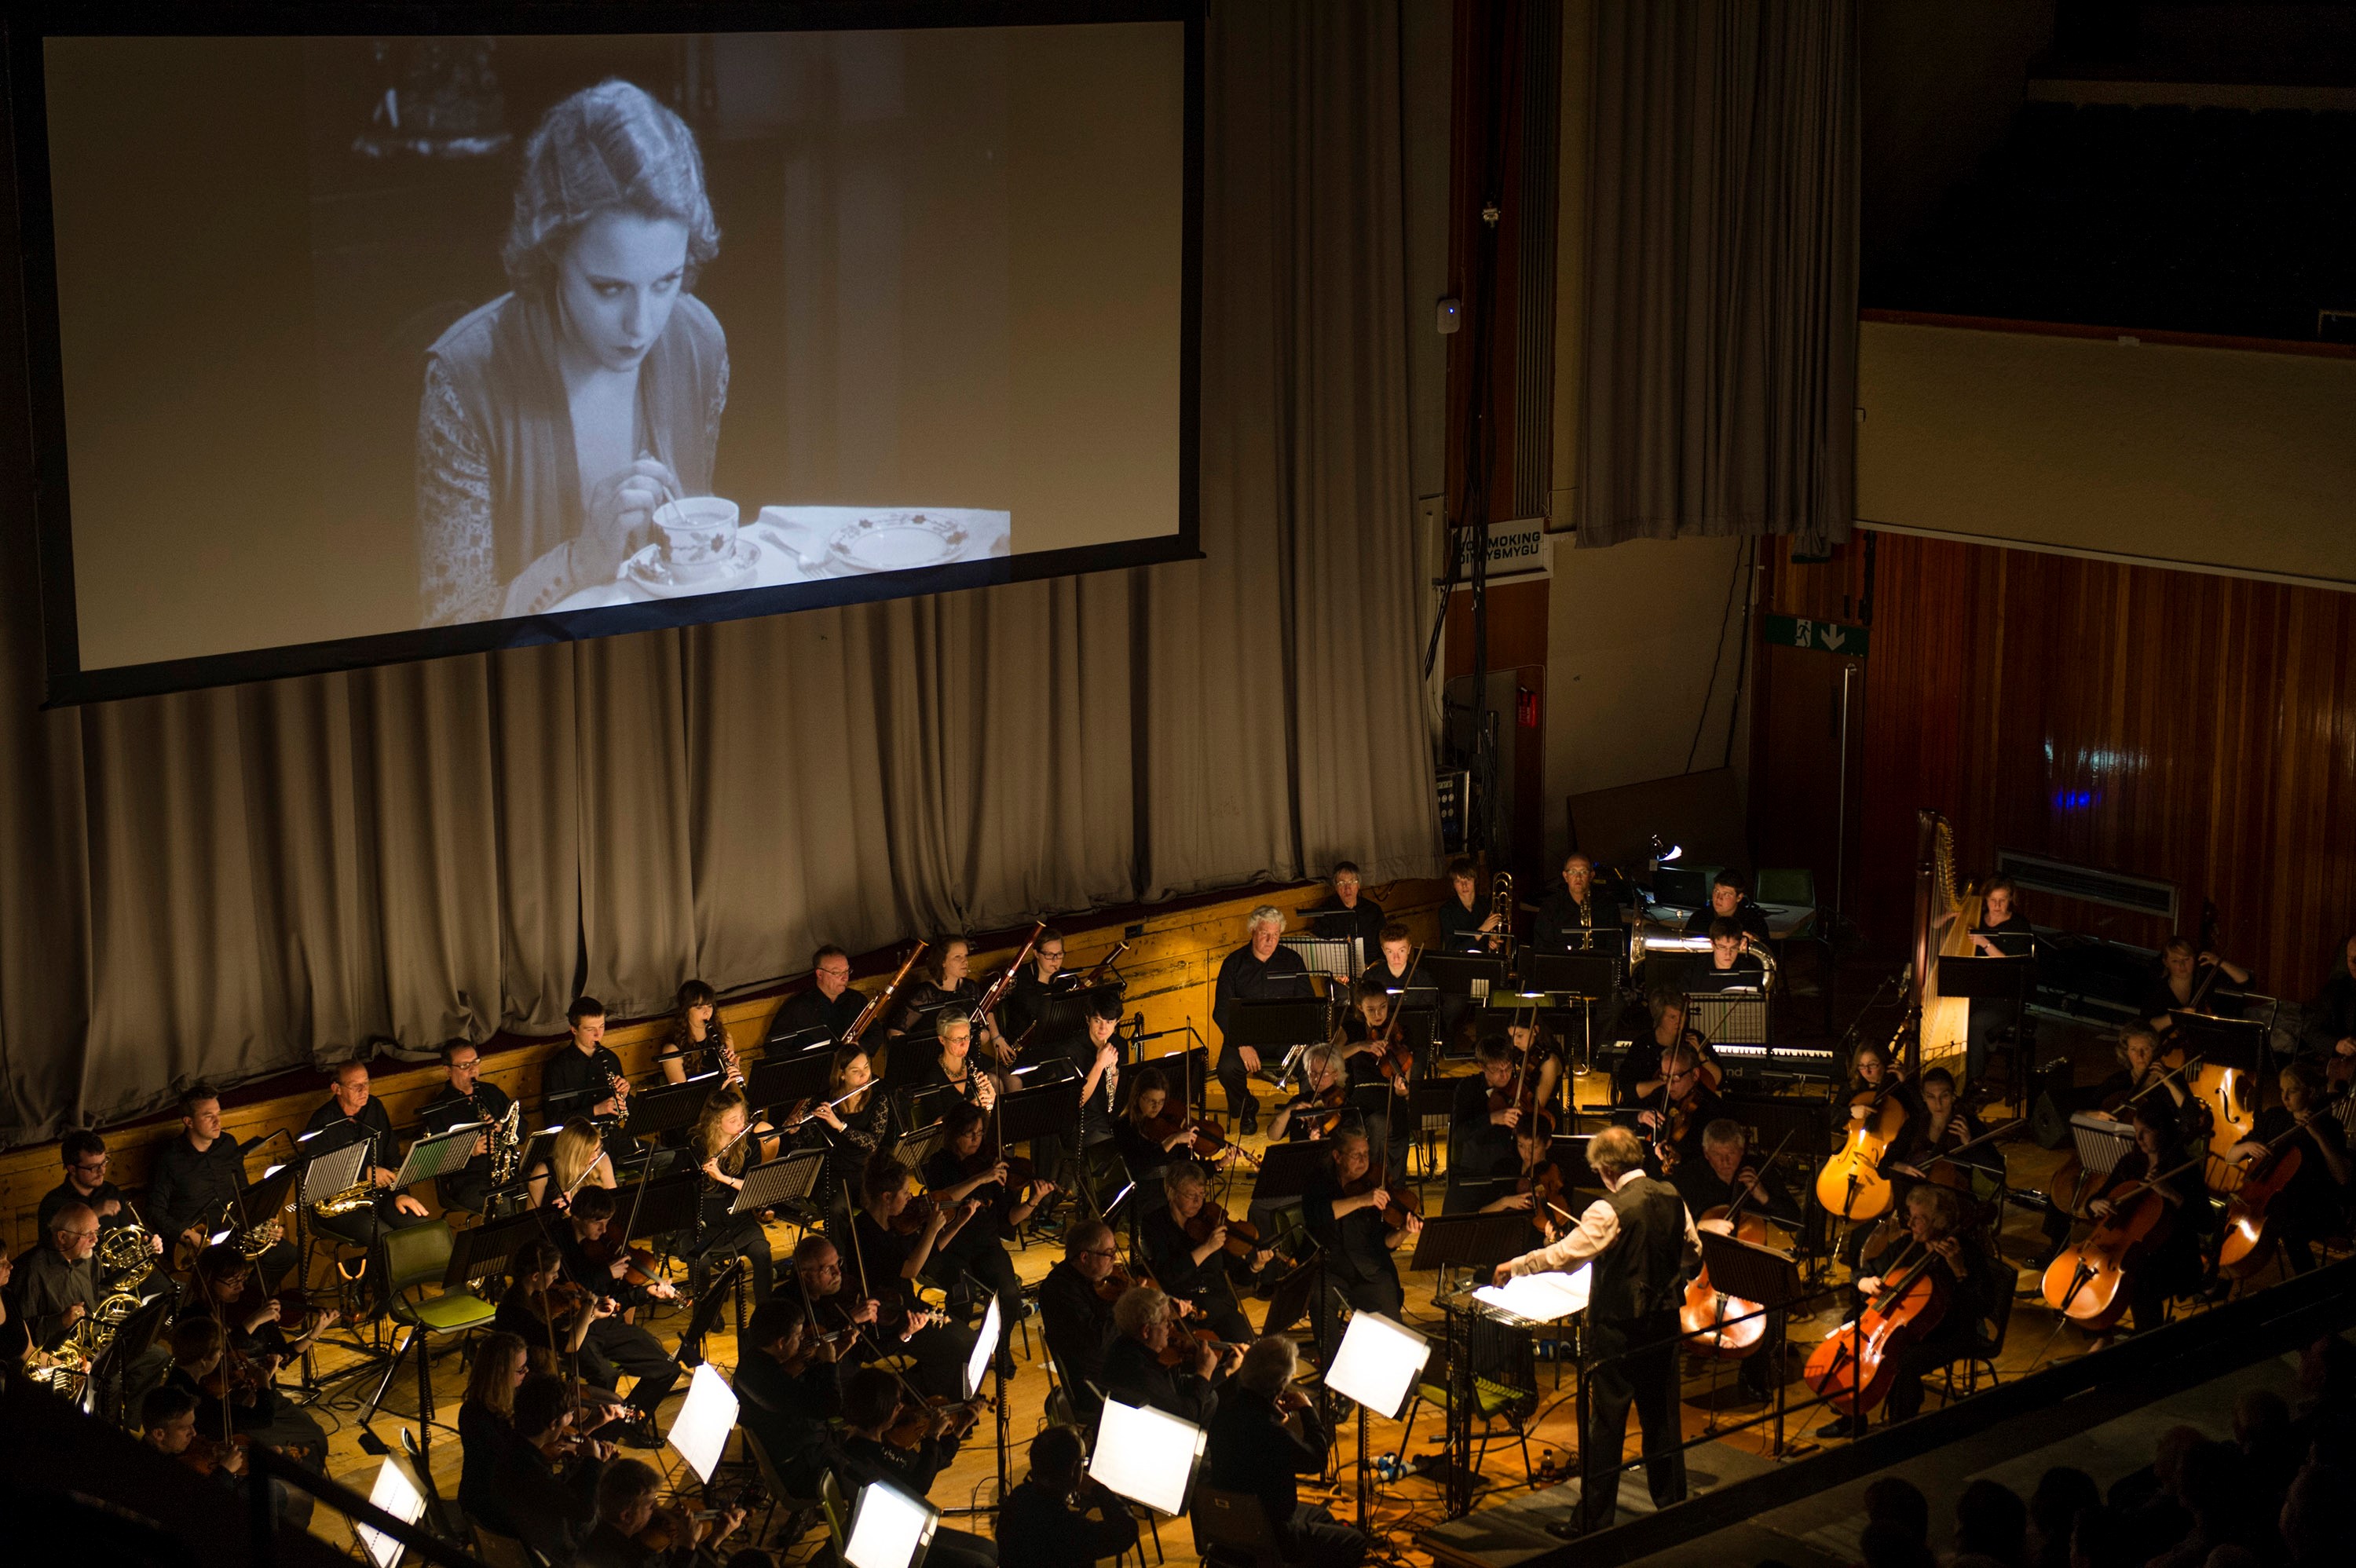 Philomusica performing Neil’s score to accompany a screening of Hitchcock’s thriller Blackmail at Aberystwyth Arts Centre in 2014. Photo credit: Keith Morris